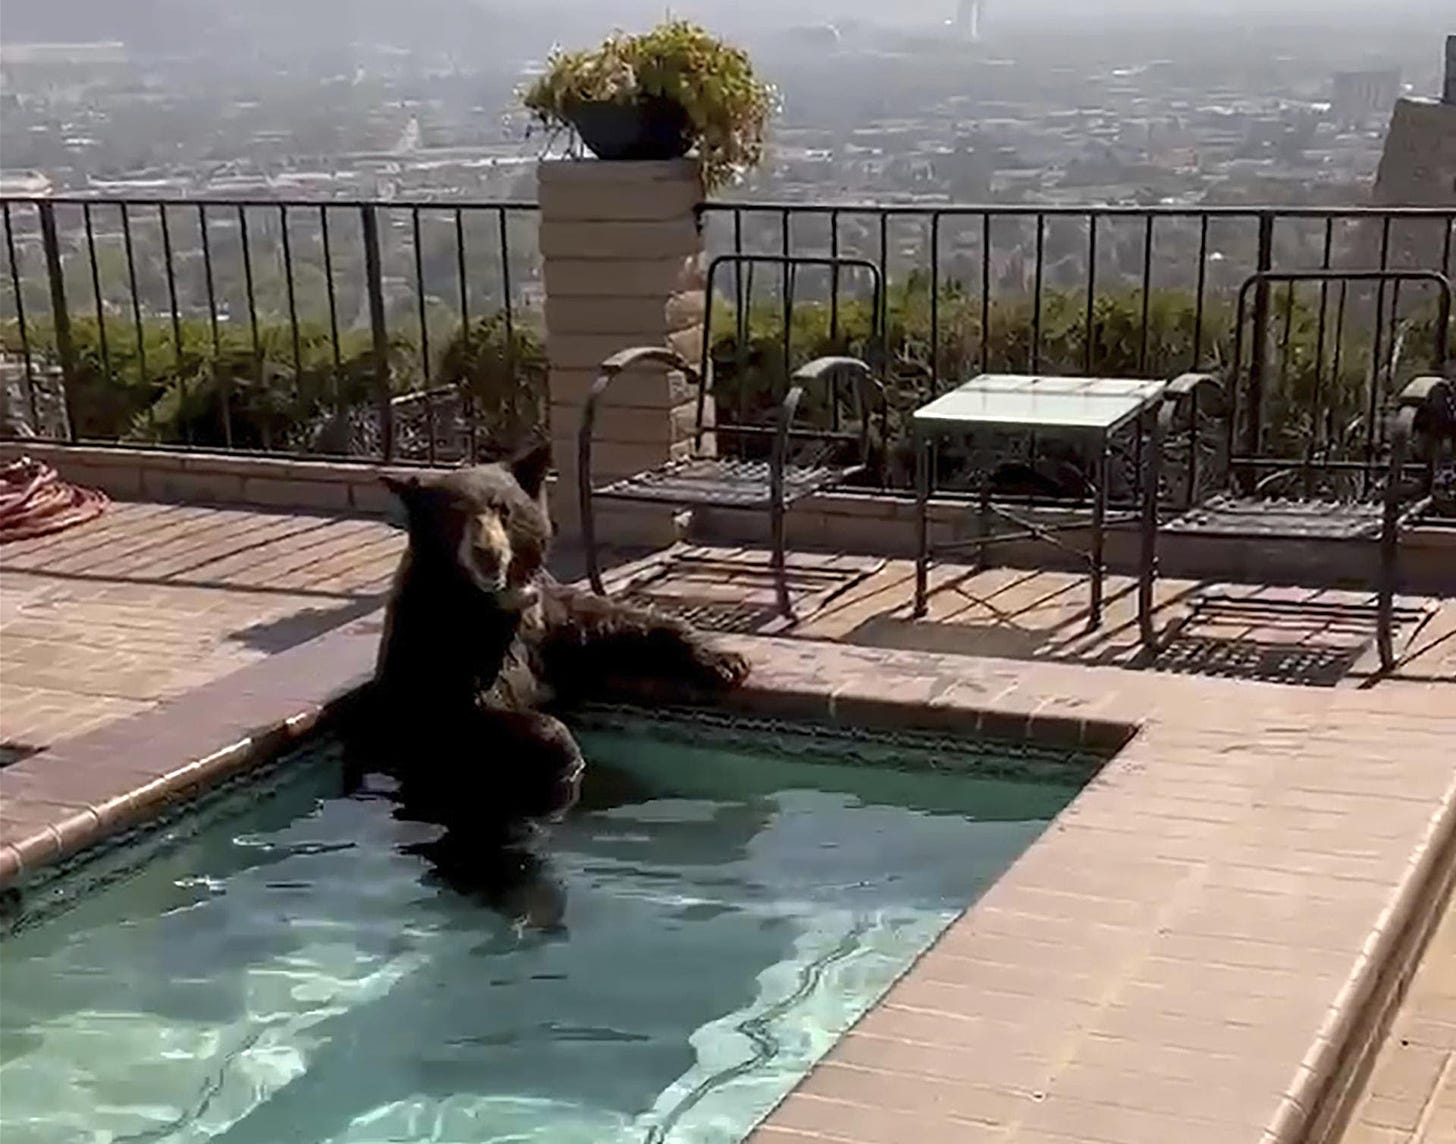 A bear sits in a jacuzzi in Burbank, California.